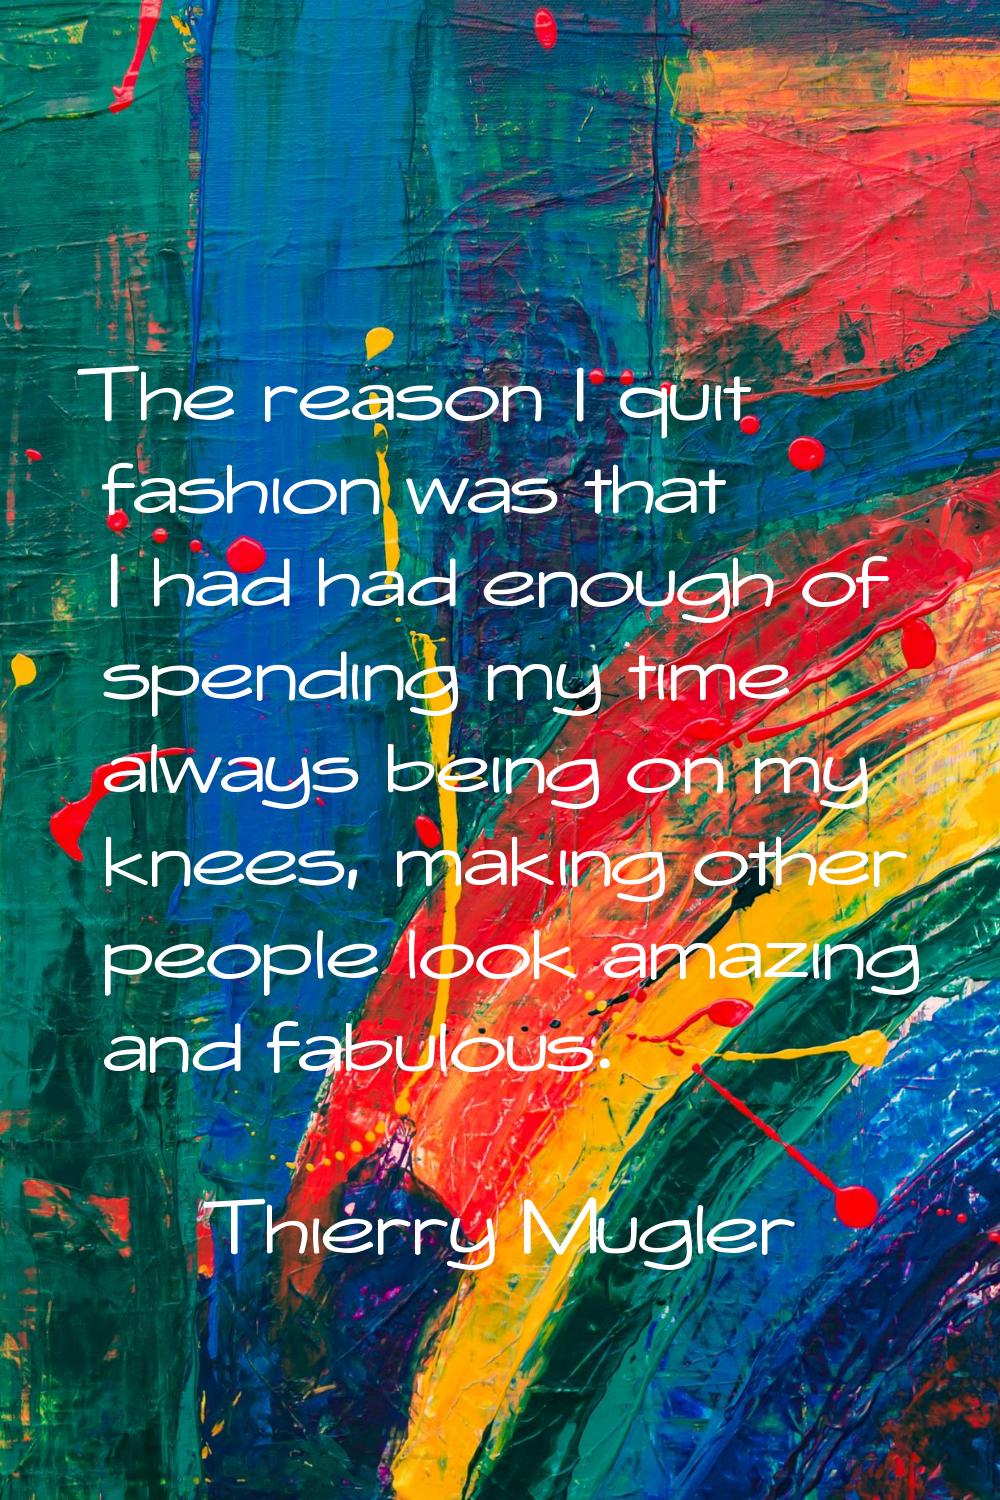 The reason I quit fashion was that I had had enough of spending my time always being on my knees, m